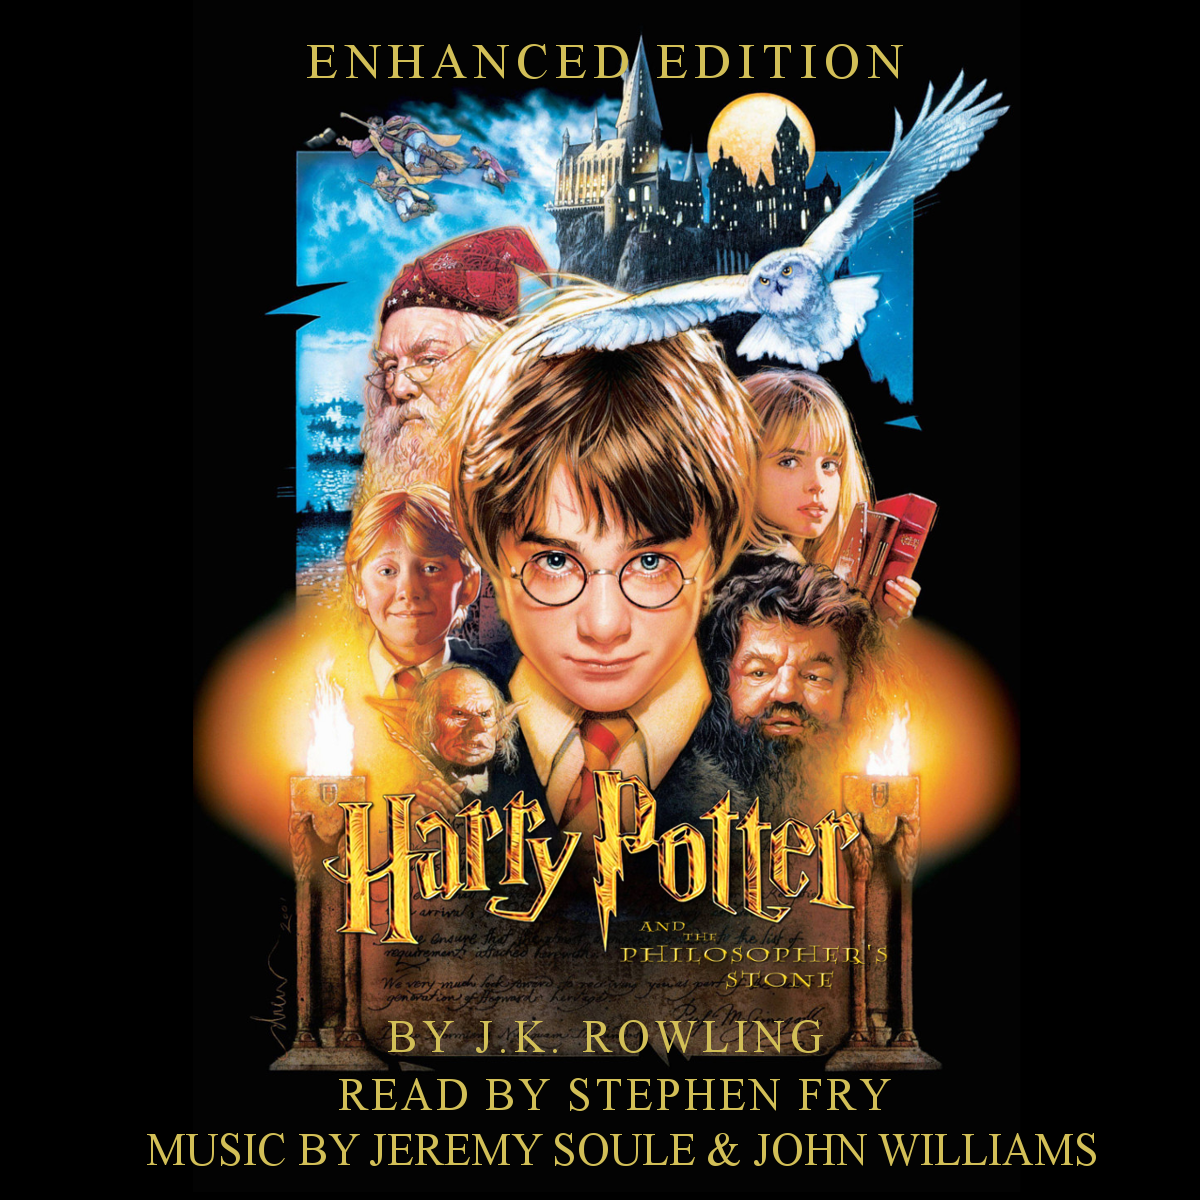 Do the Harry Potter audiobooks include sound effects?